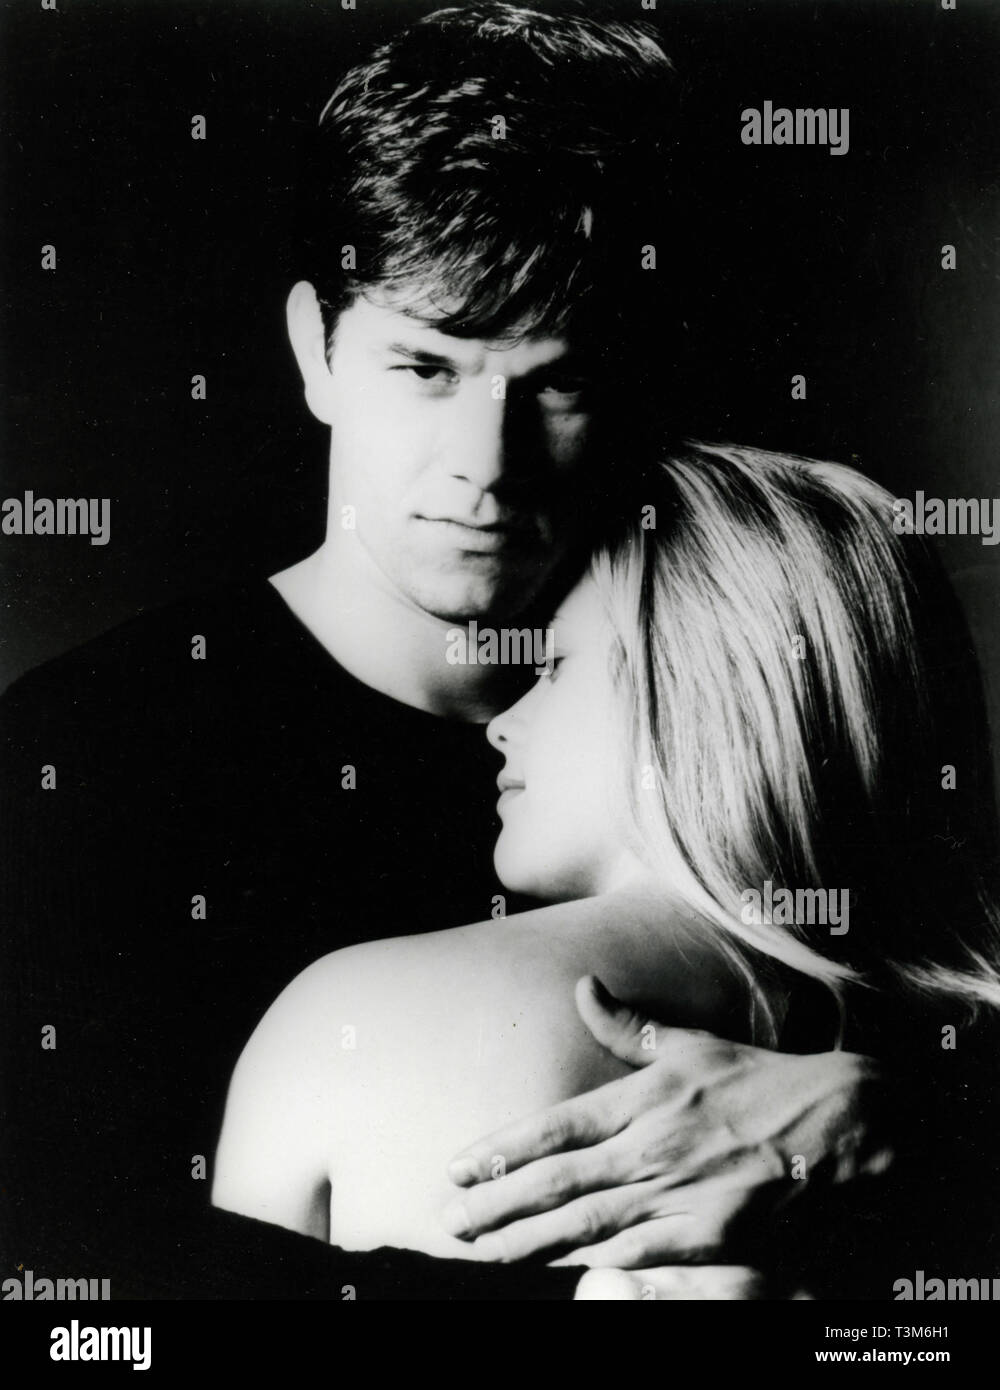 Mark Wahlberg e Reese Witherspoon nel film di paura, 1996 Foto Stock